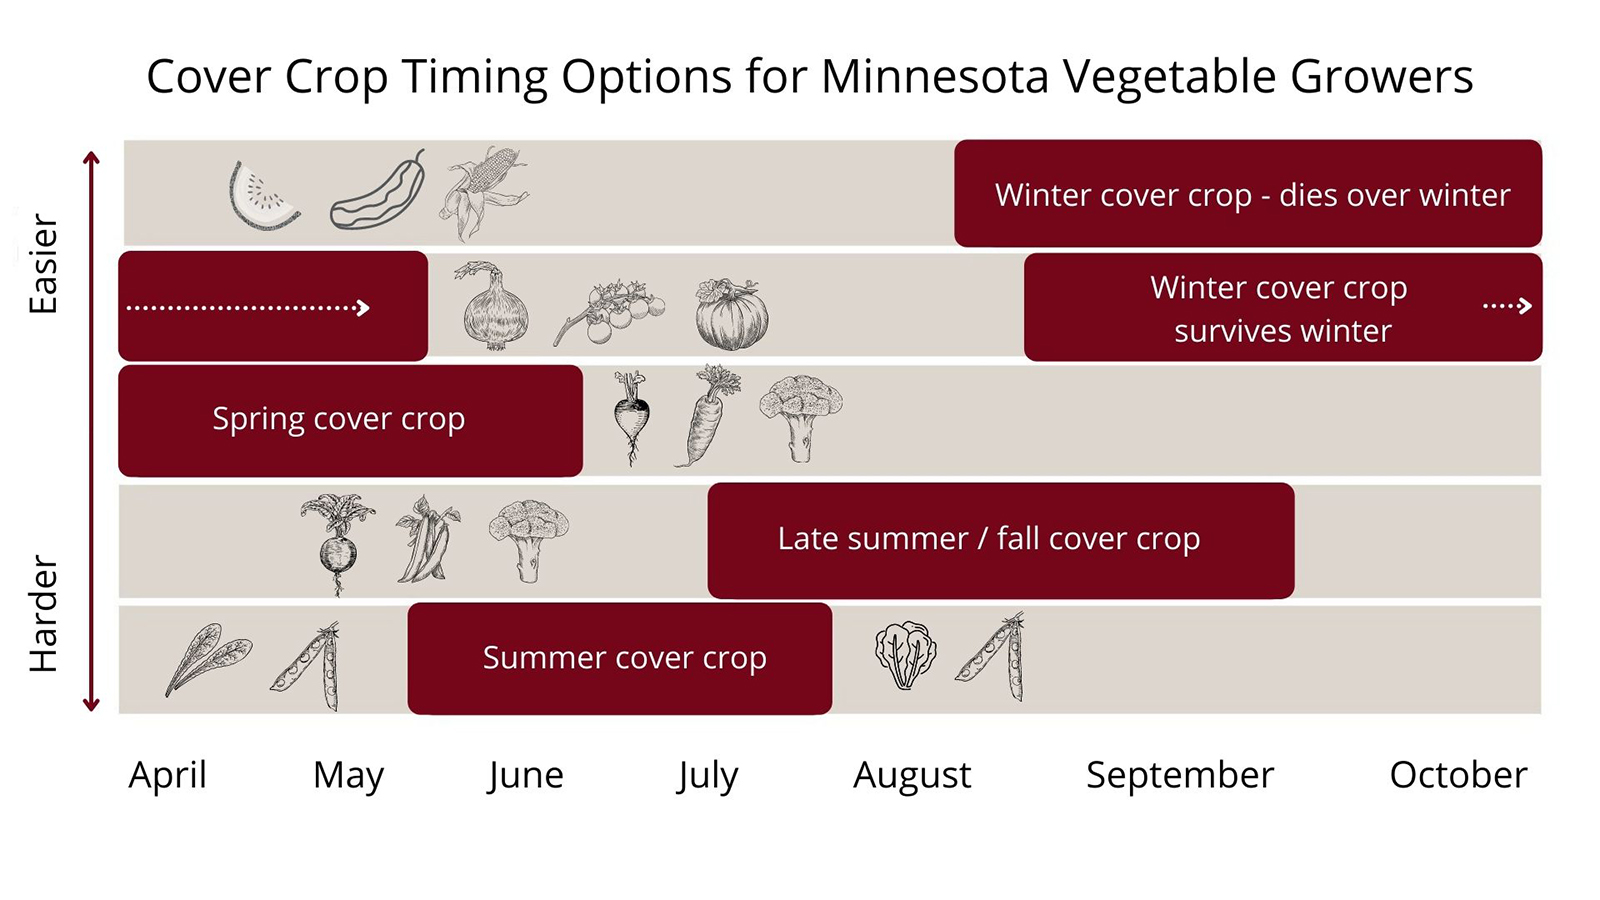 Diagram of cover crop timing options for Minnesota vegetable growers. See page for detailed transcript.